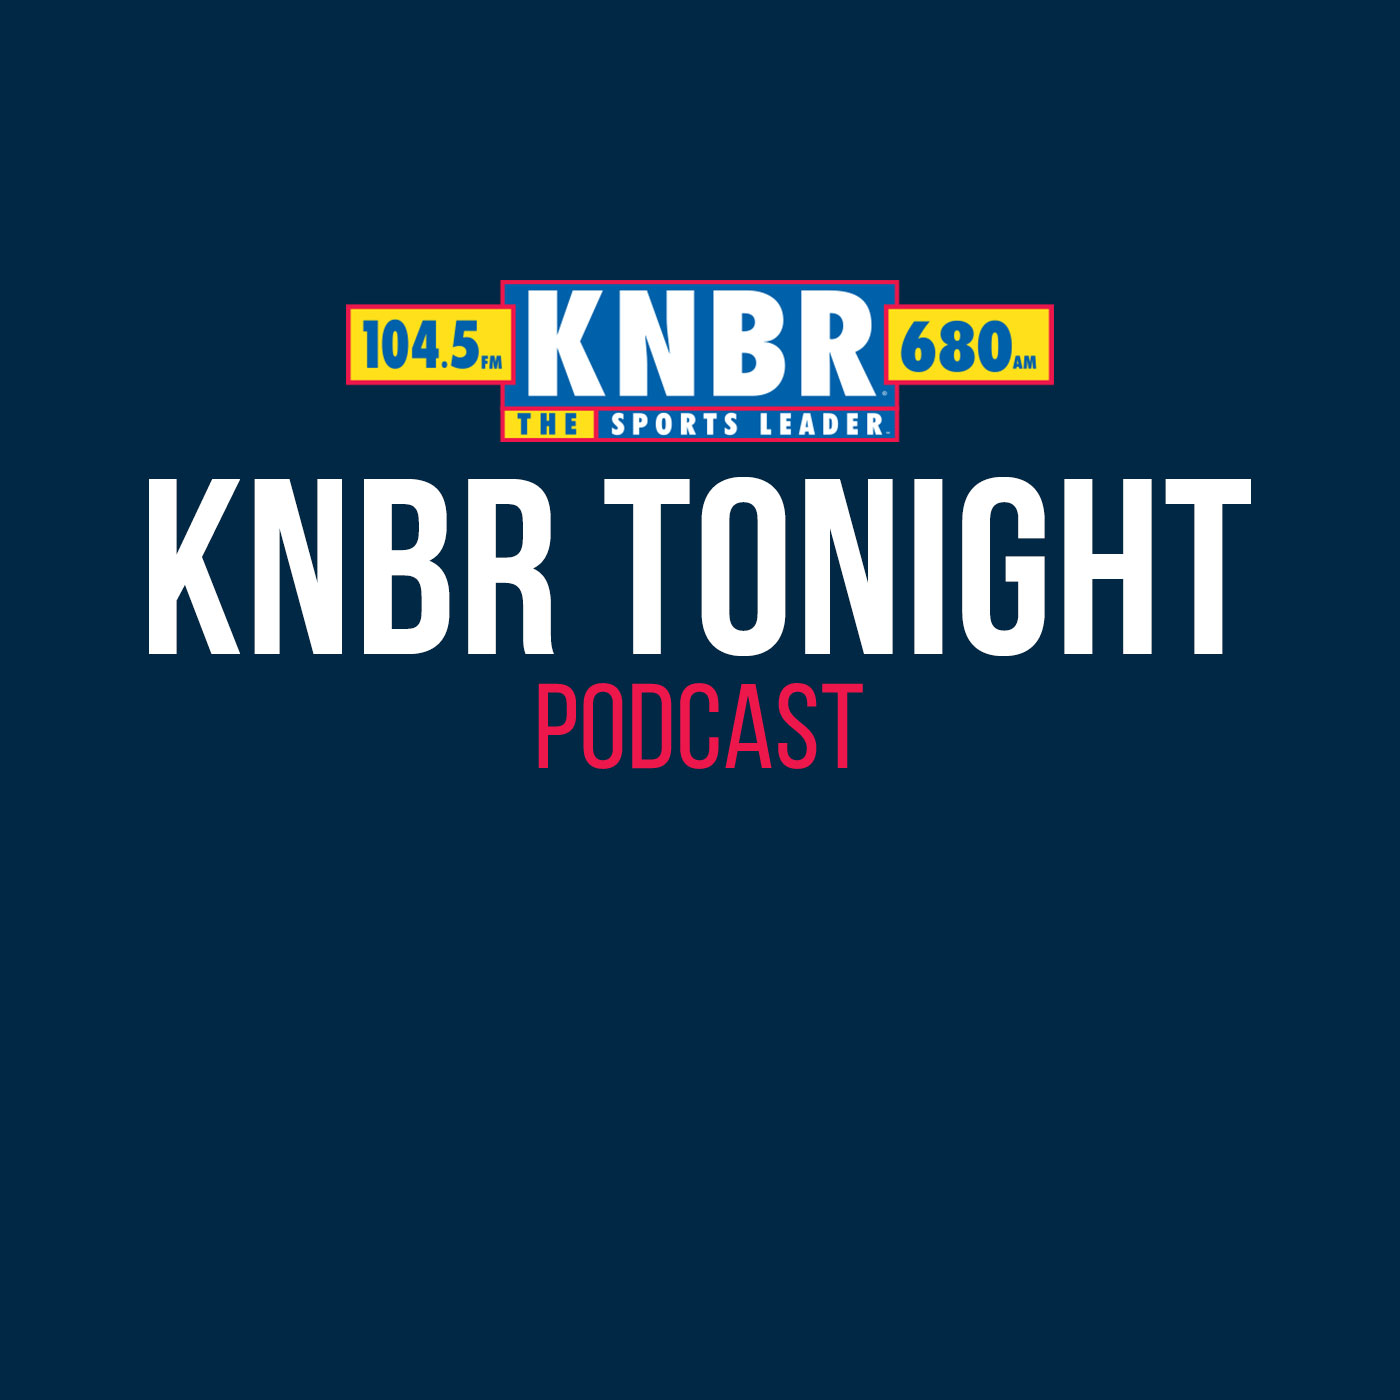 10-18 Evan Webeck joins Kerry Crowley on KNBR Tonight on the eve of the Warriors season opener to forecast the upcoming season